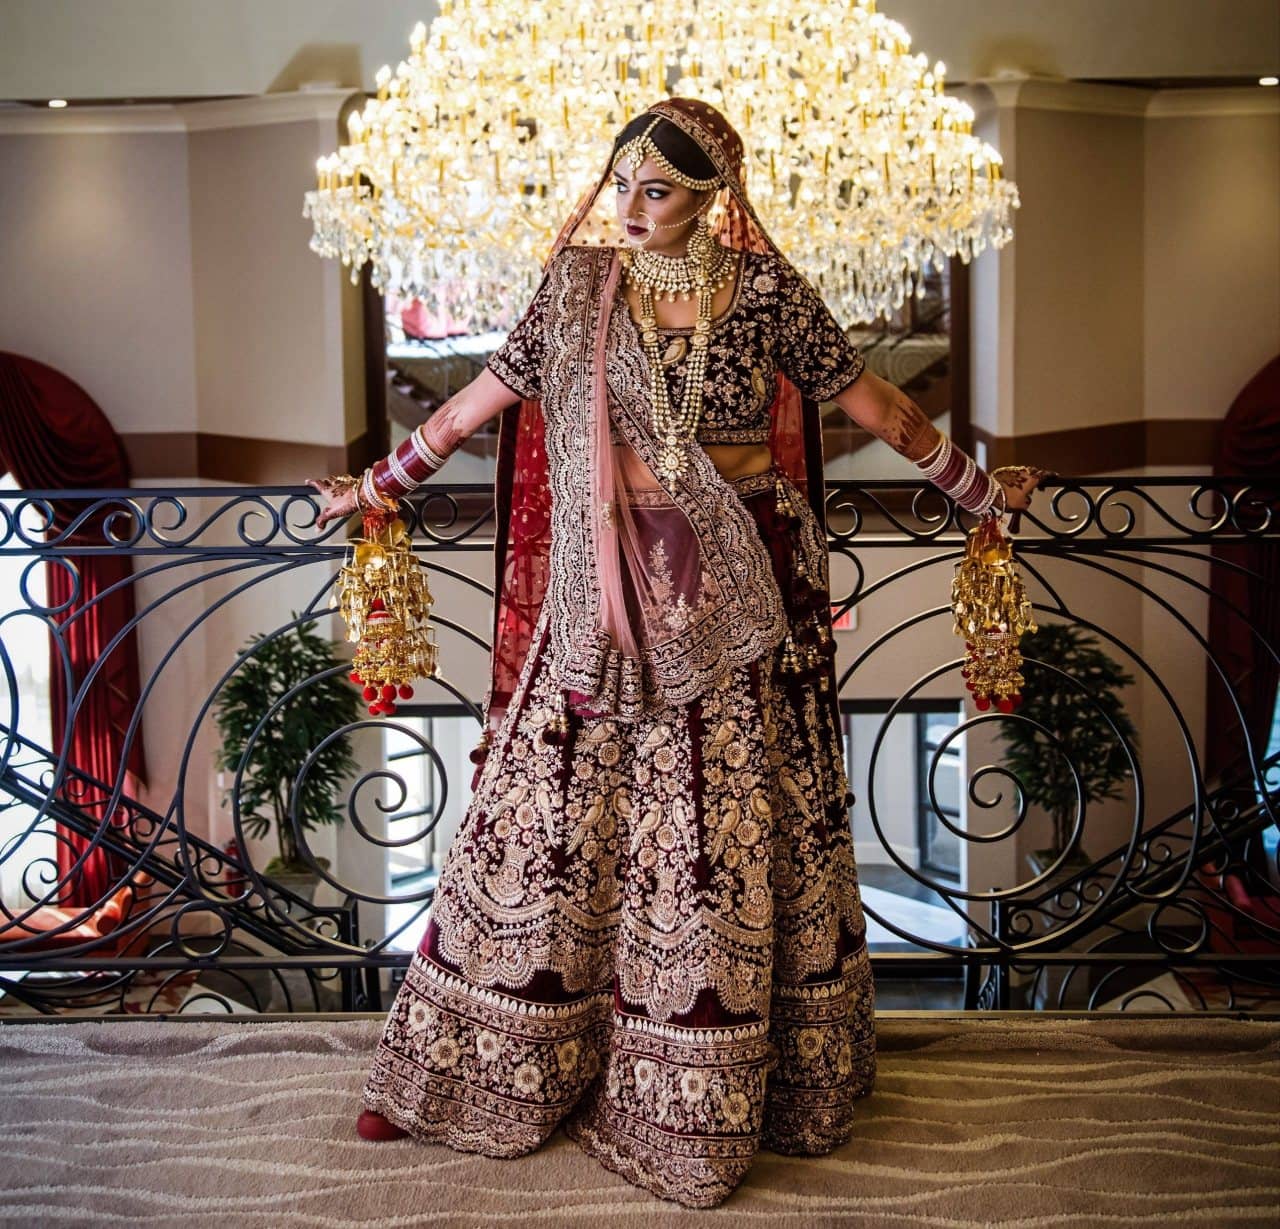 10 Cities With The Best Bridal Lehengas In India - The Channel 46